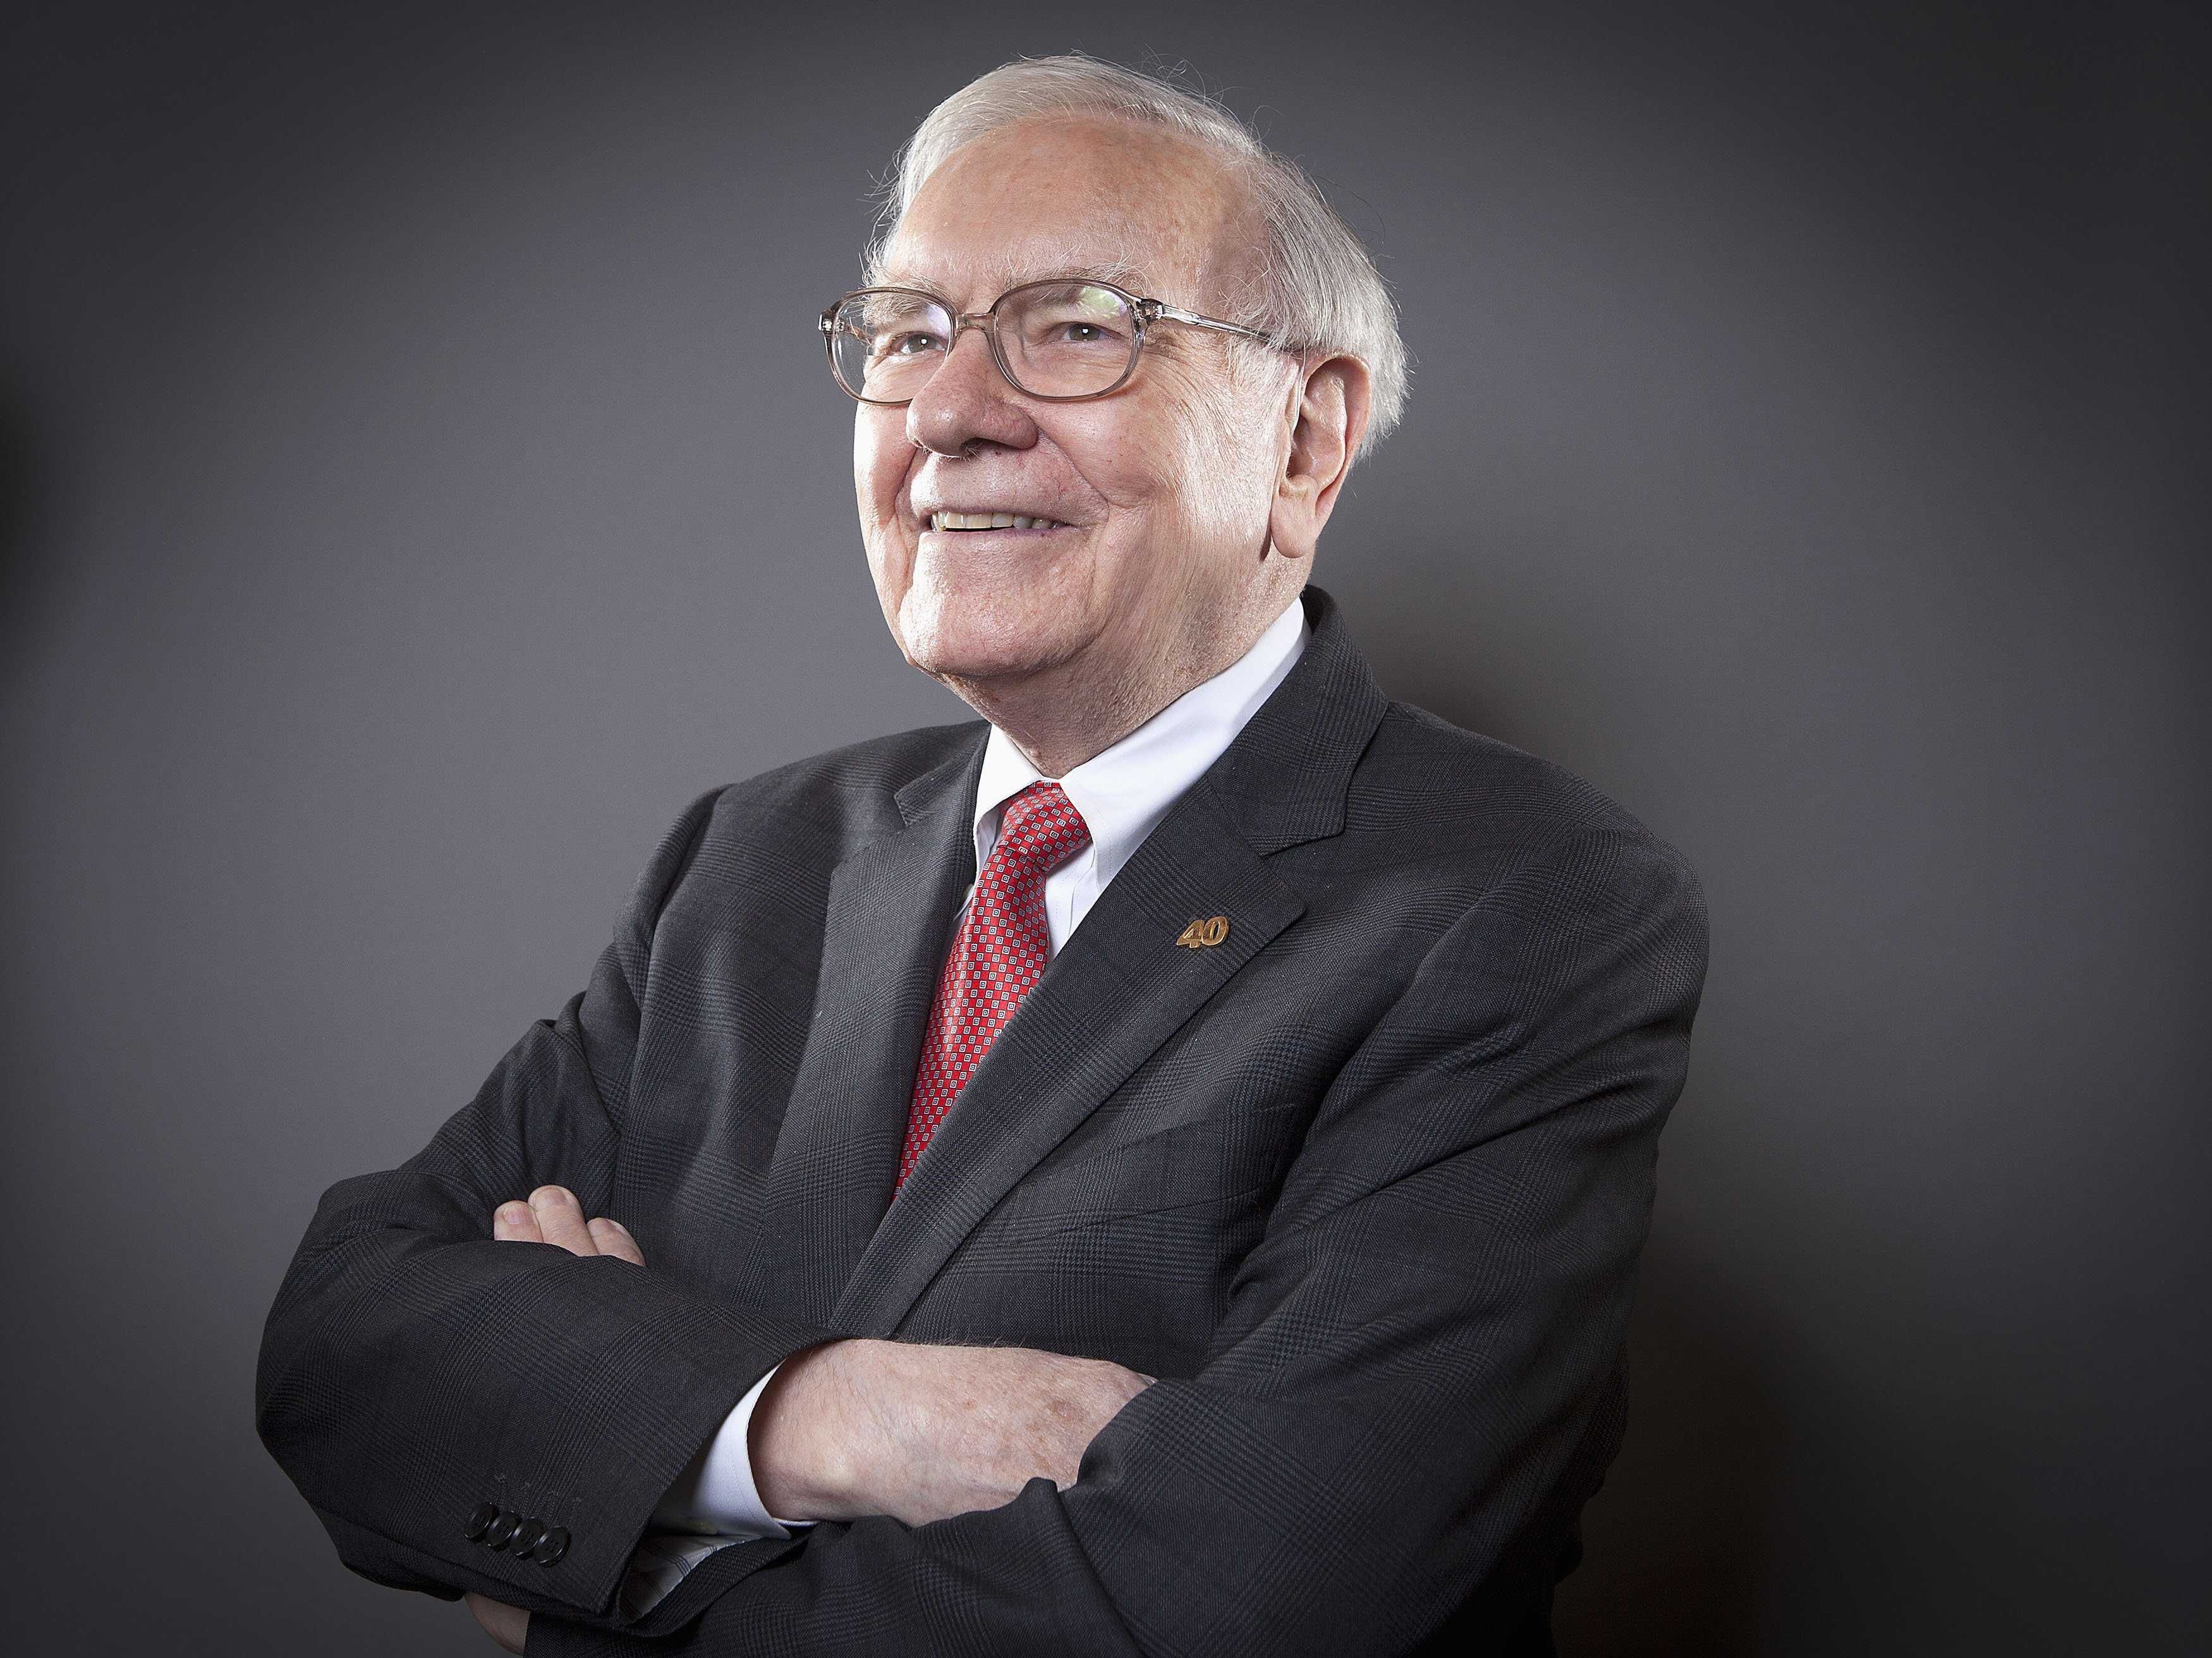 Download free Wallpaper of Warren Buffett in high resolution and high quality. Also imag. Warren buffett, Investing money personal finance, Dave ramsey investing